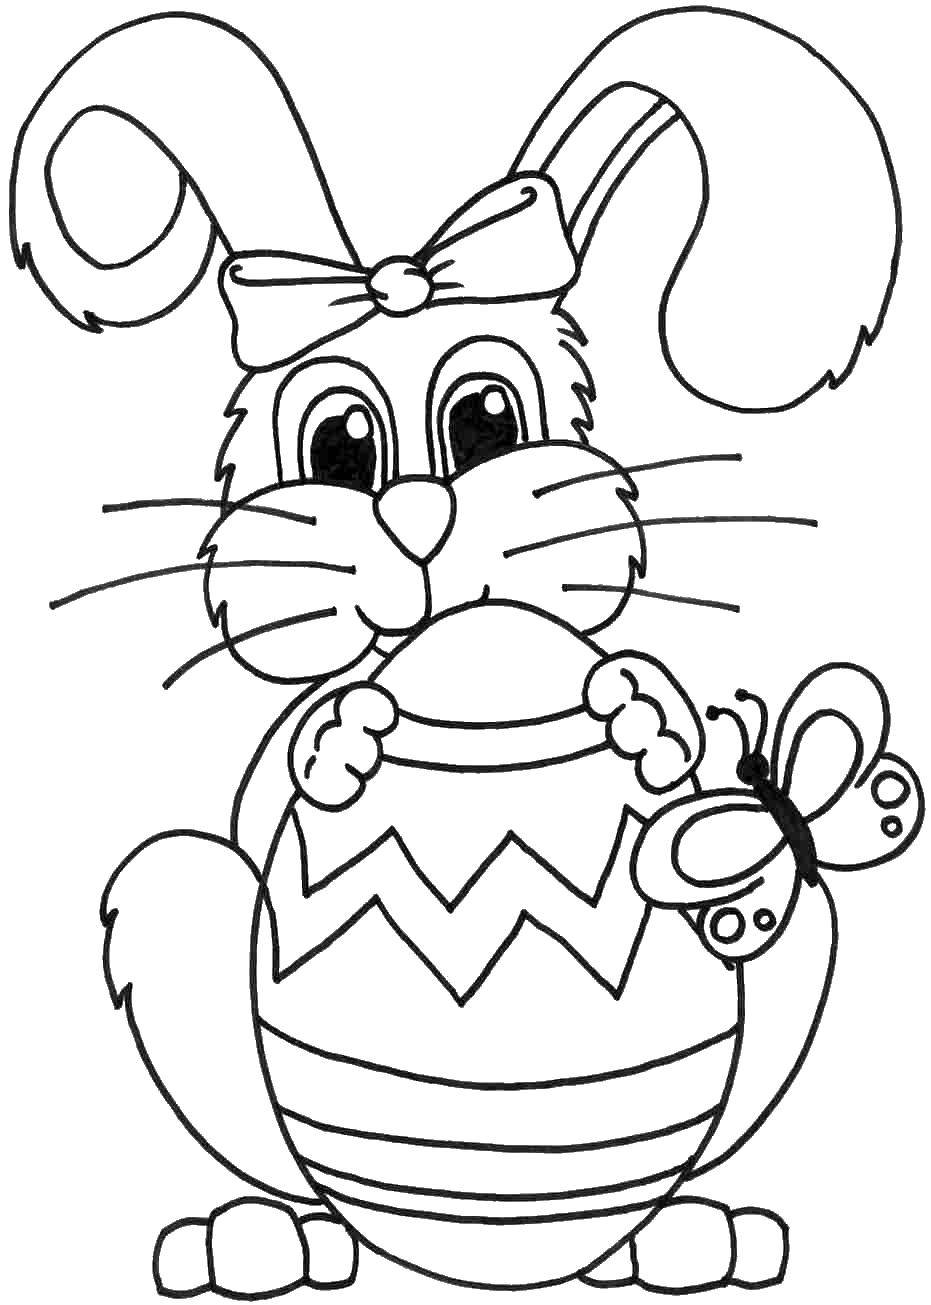 Coloring Rabbit with big egg and butterfly. Category the rabbit. Tags:  egg.